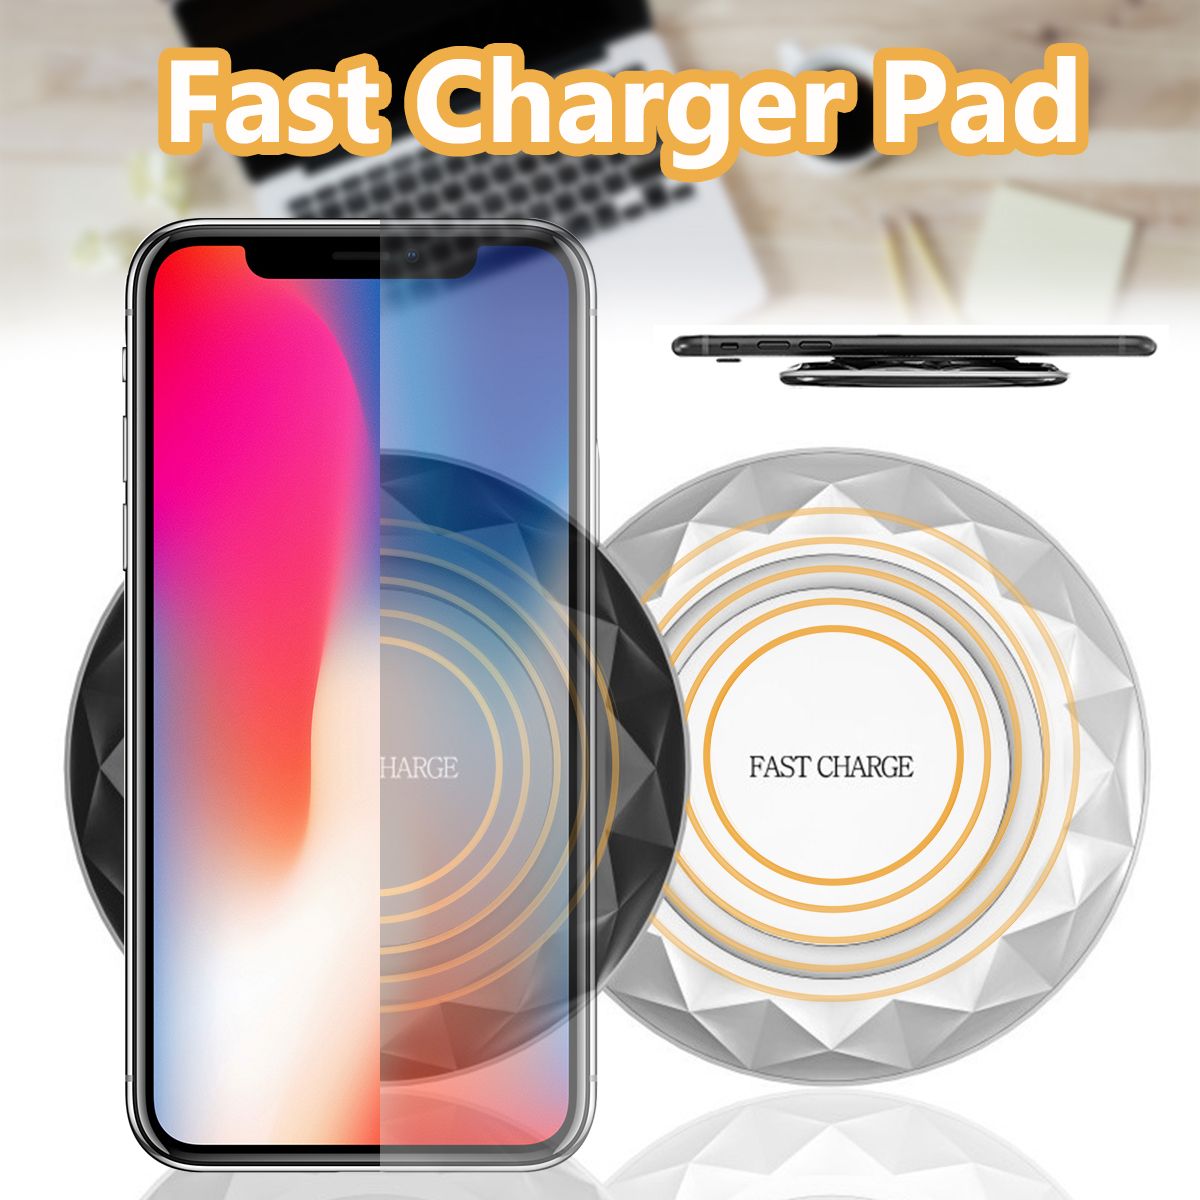 Wireless-Qi-Fast-Charger-Thin-Charging-Pad-For-iPhone-88P-iPhone-X-Samsung-S8-1237344